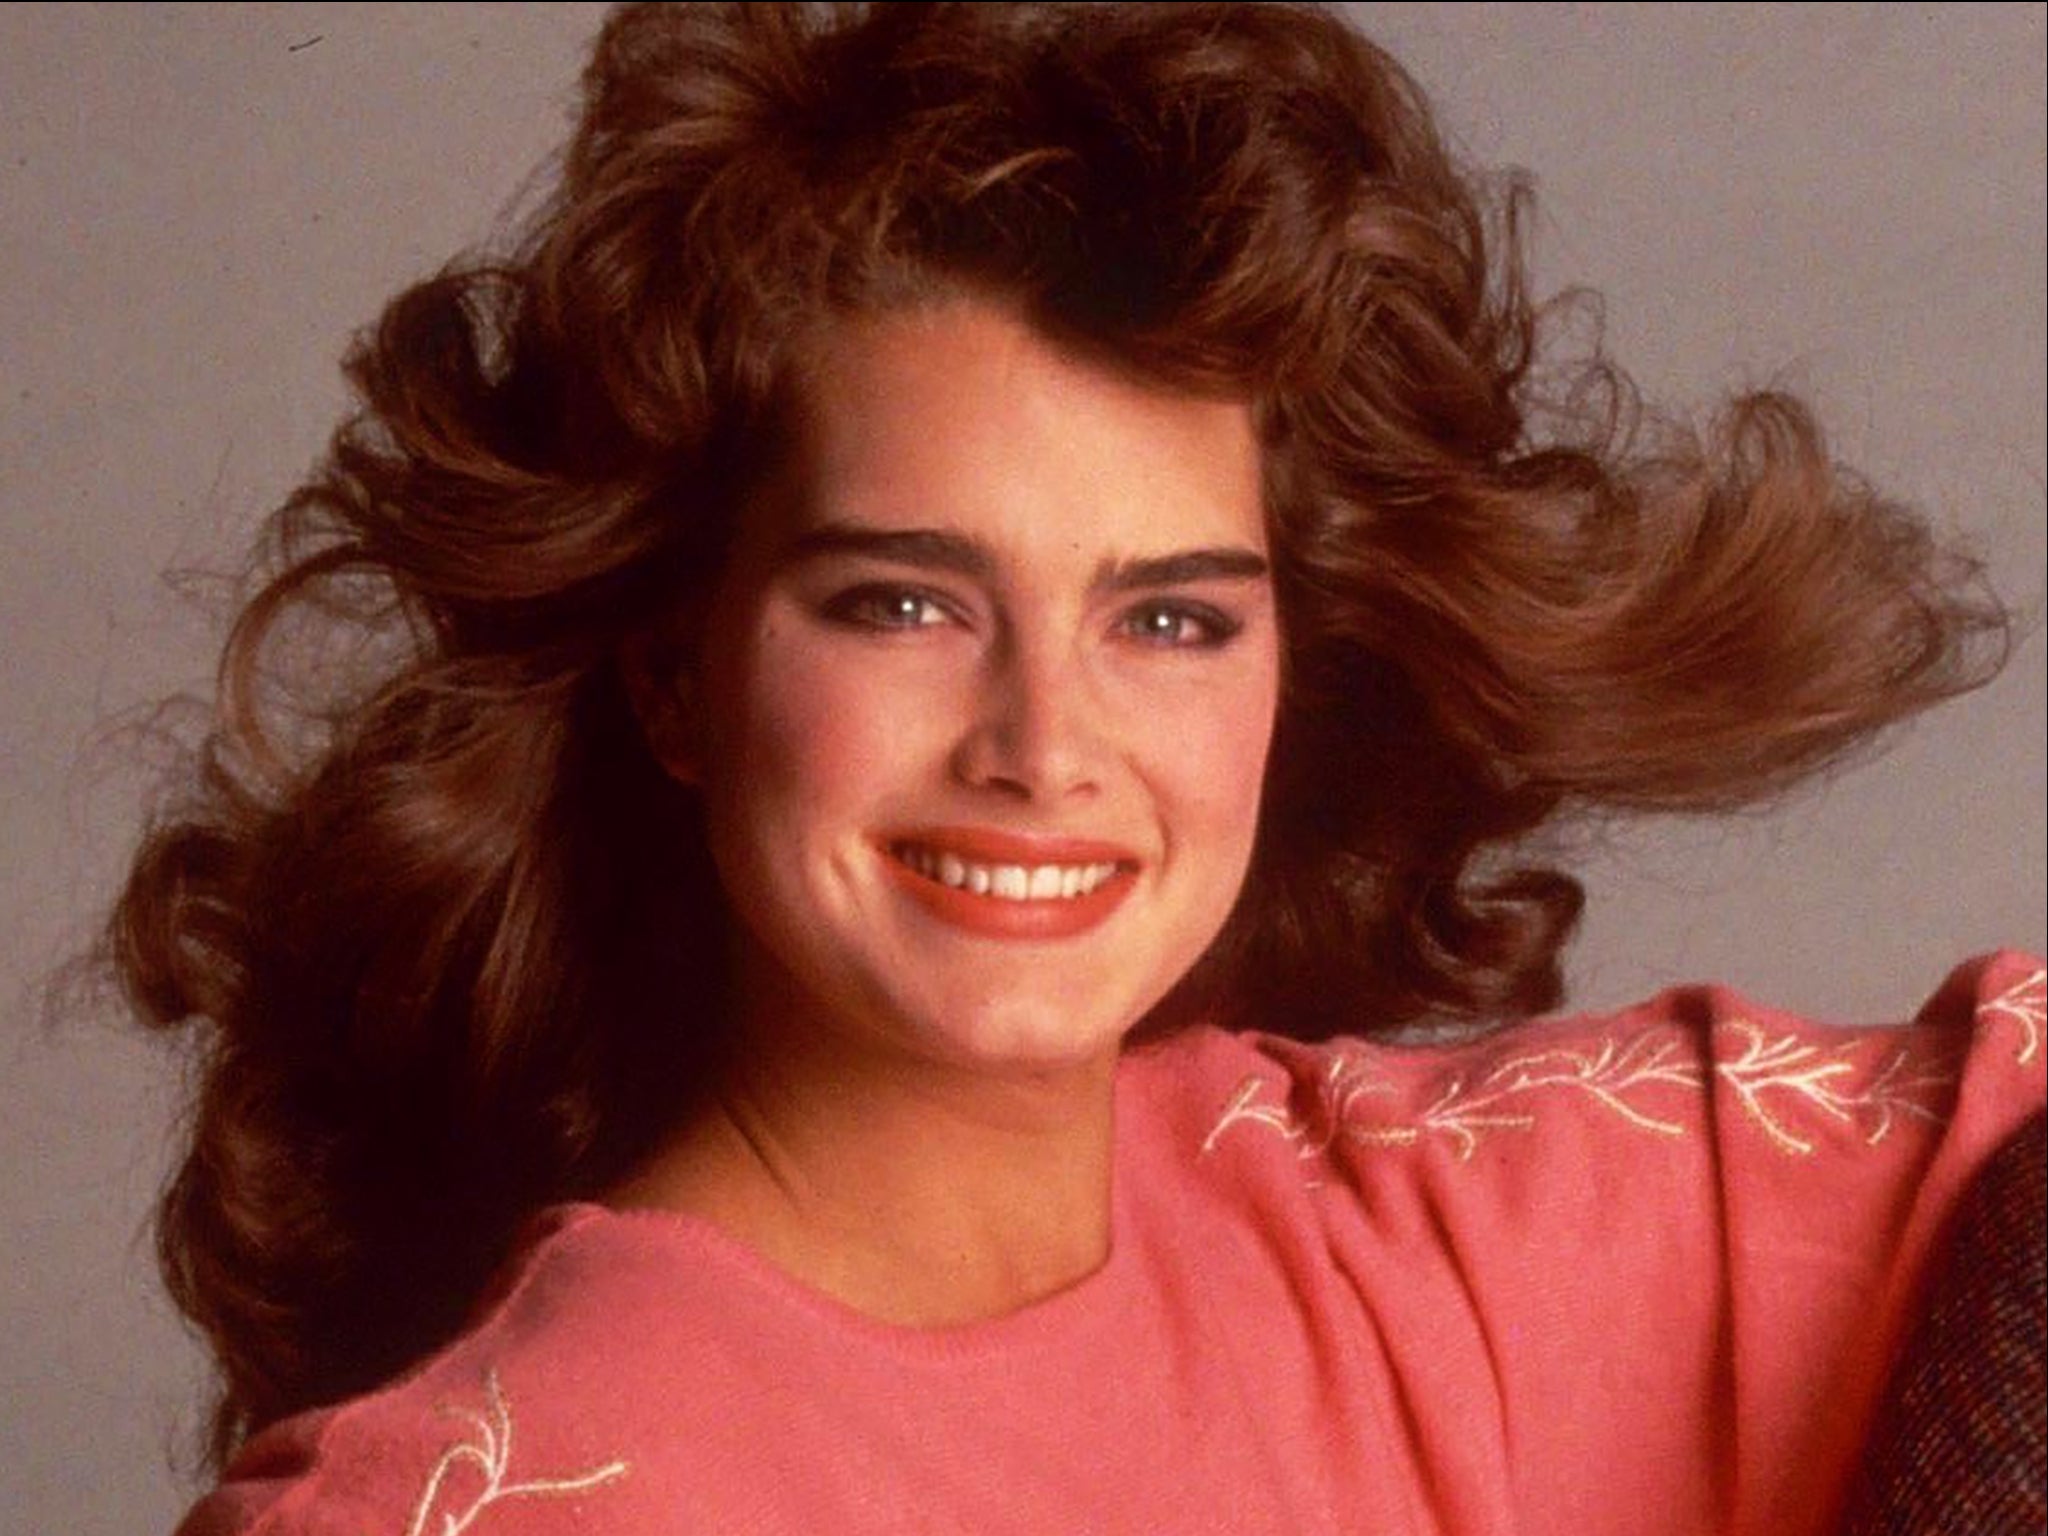 Pretty Baby The more you learn about Brooke Shields, the more remarkable she seems The Independent